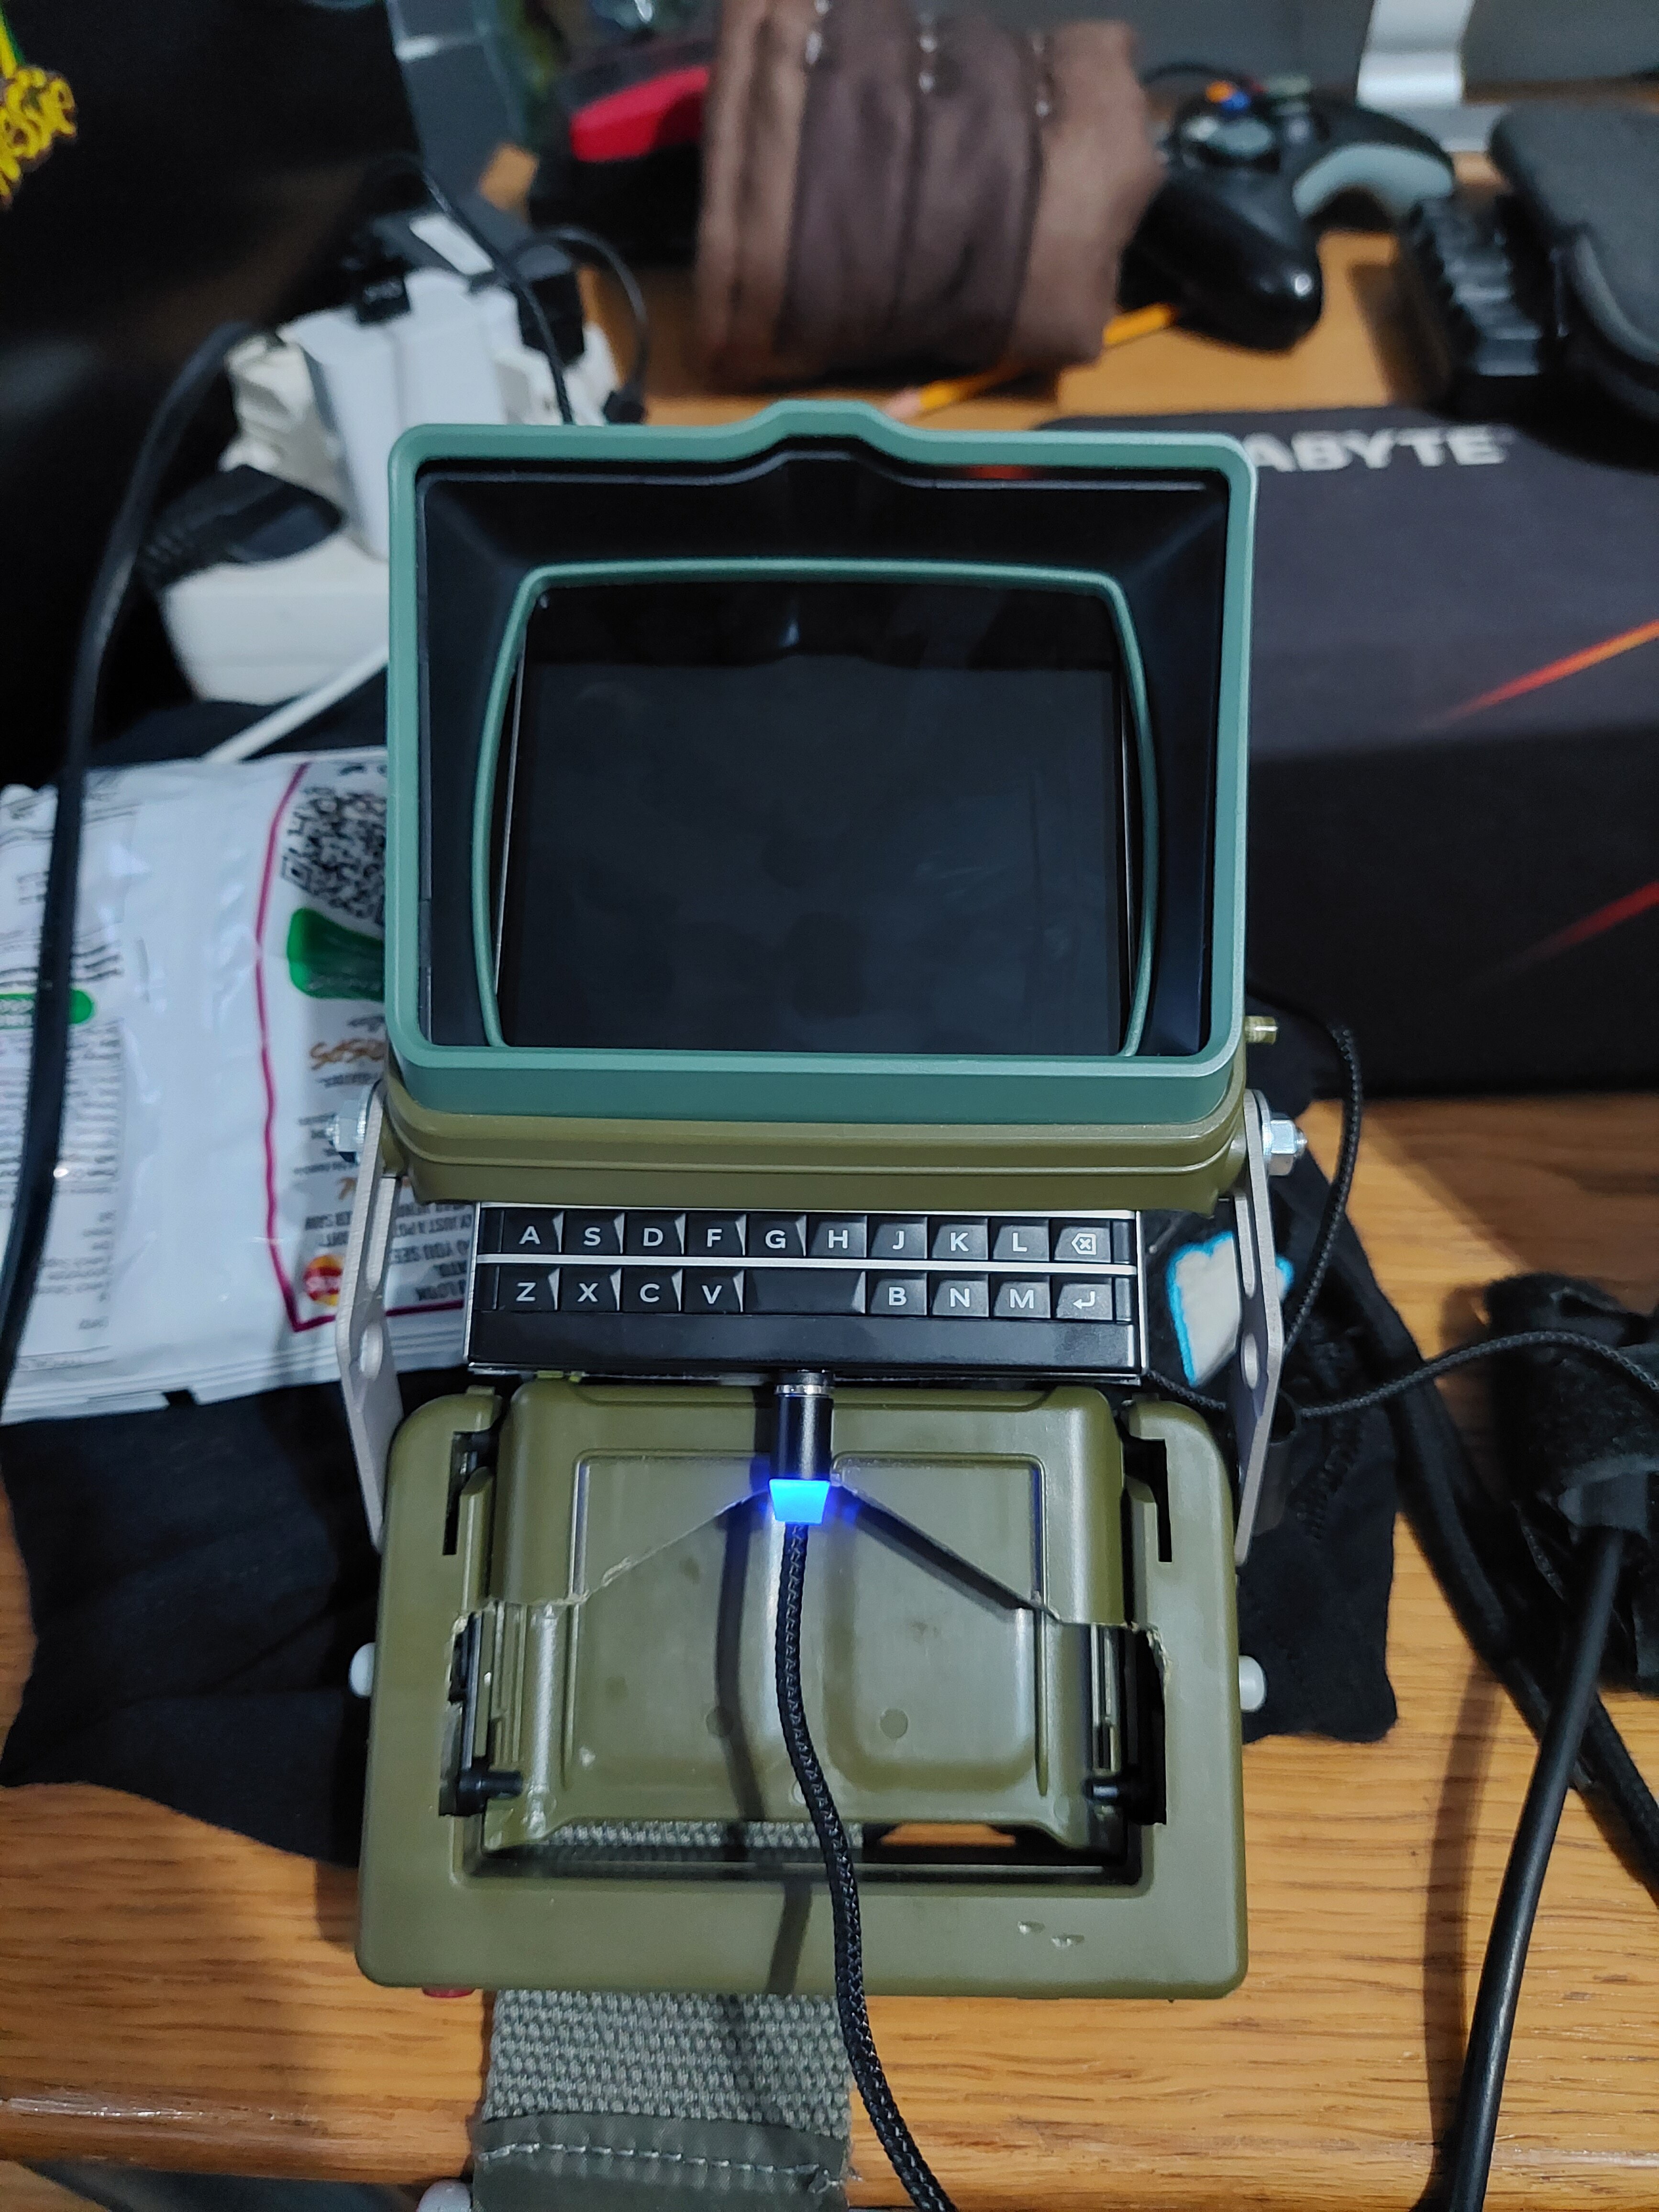 FALLOUT Pip Boy 2000 mk VI - Mod + Repaint - Punished Props Academy